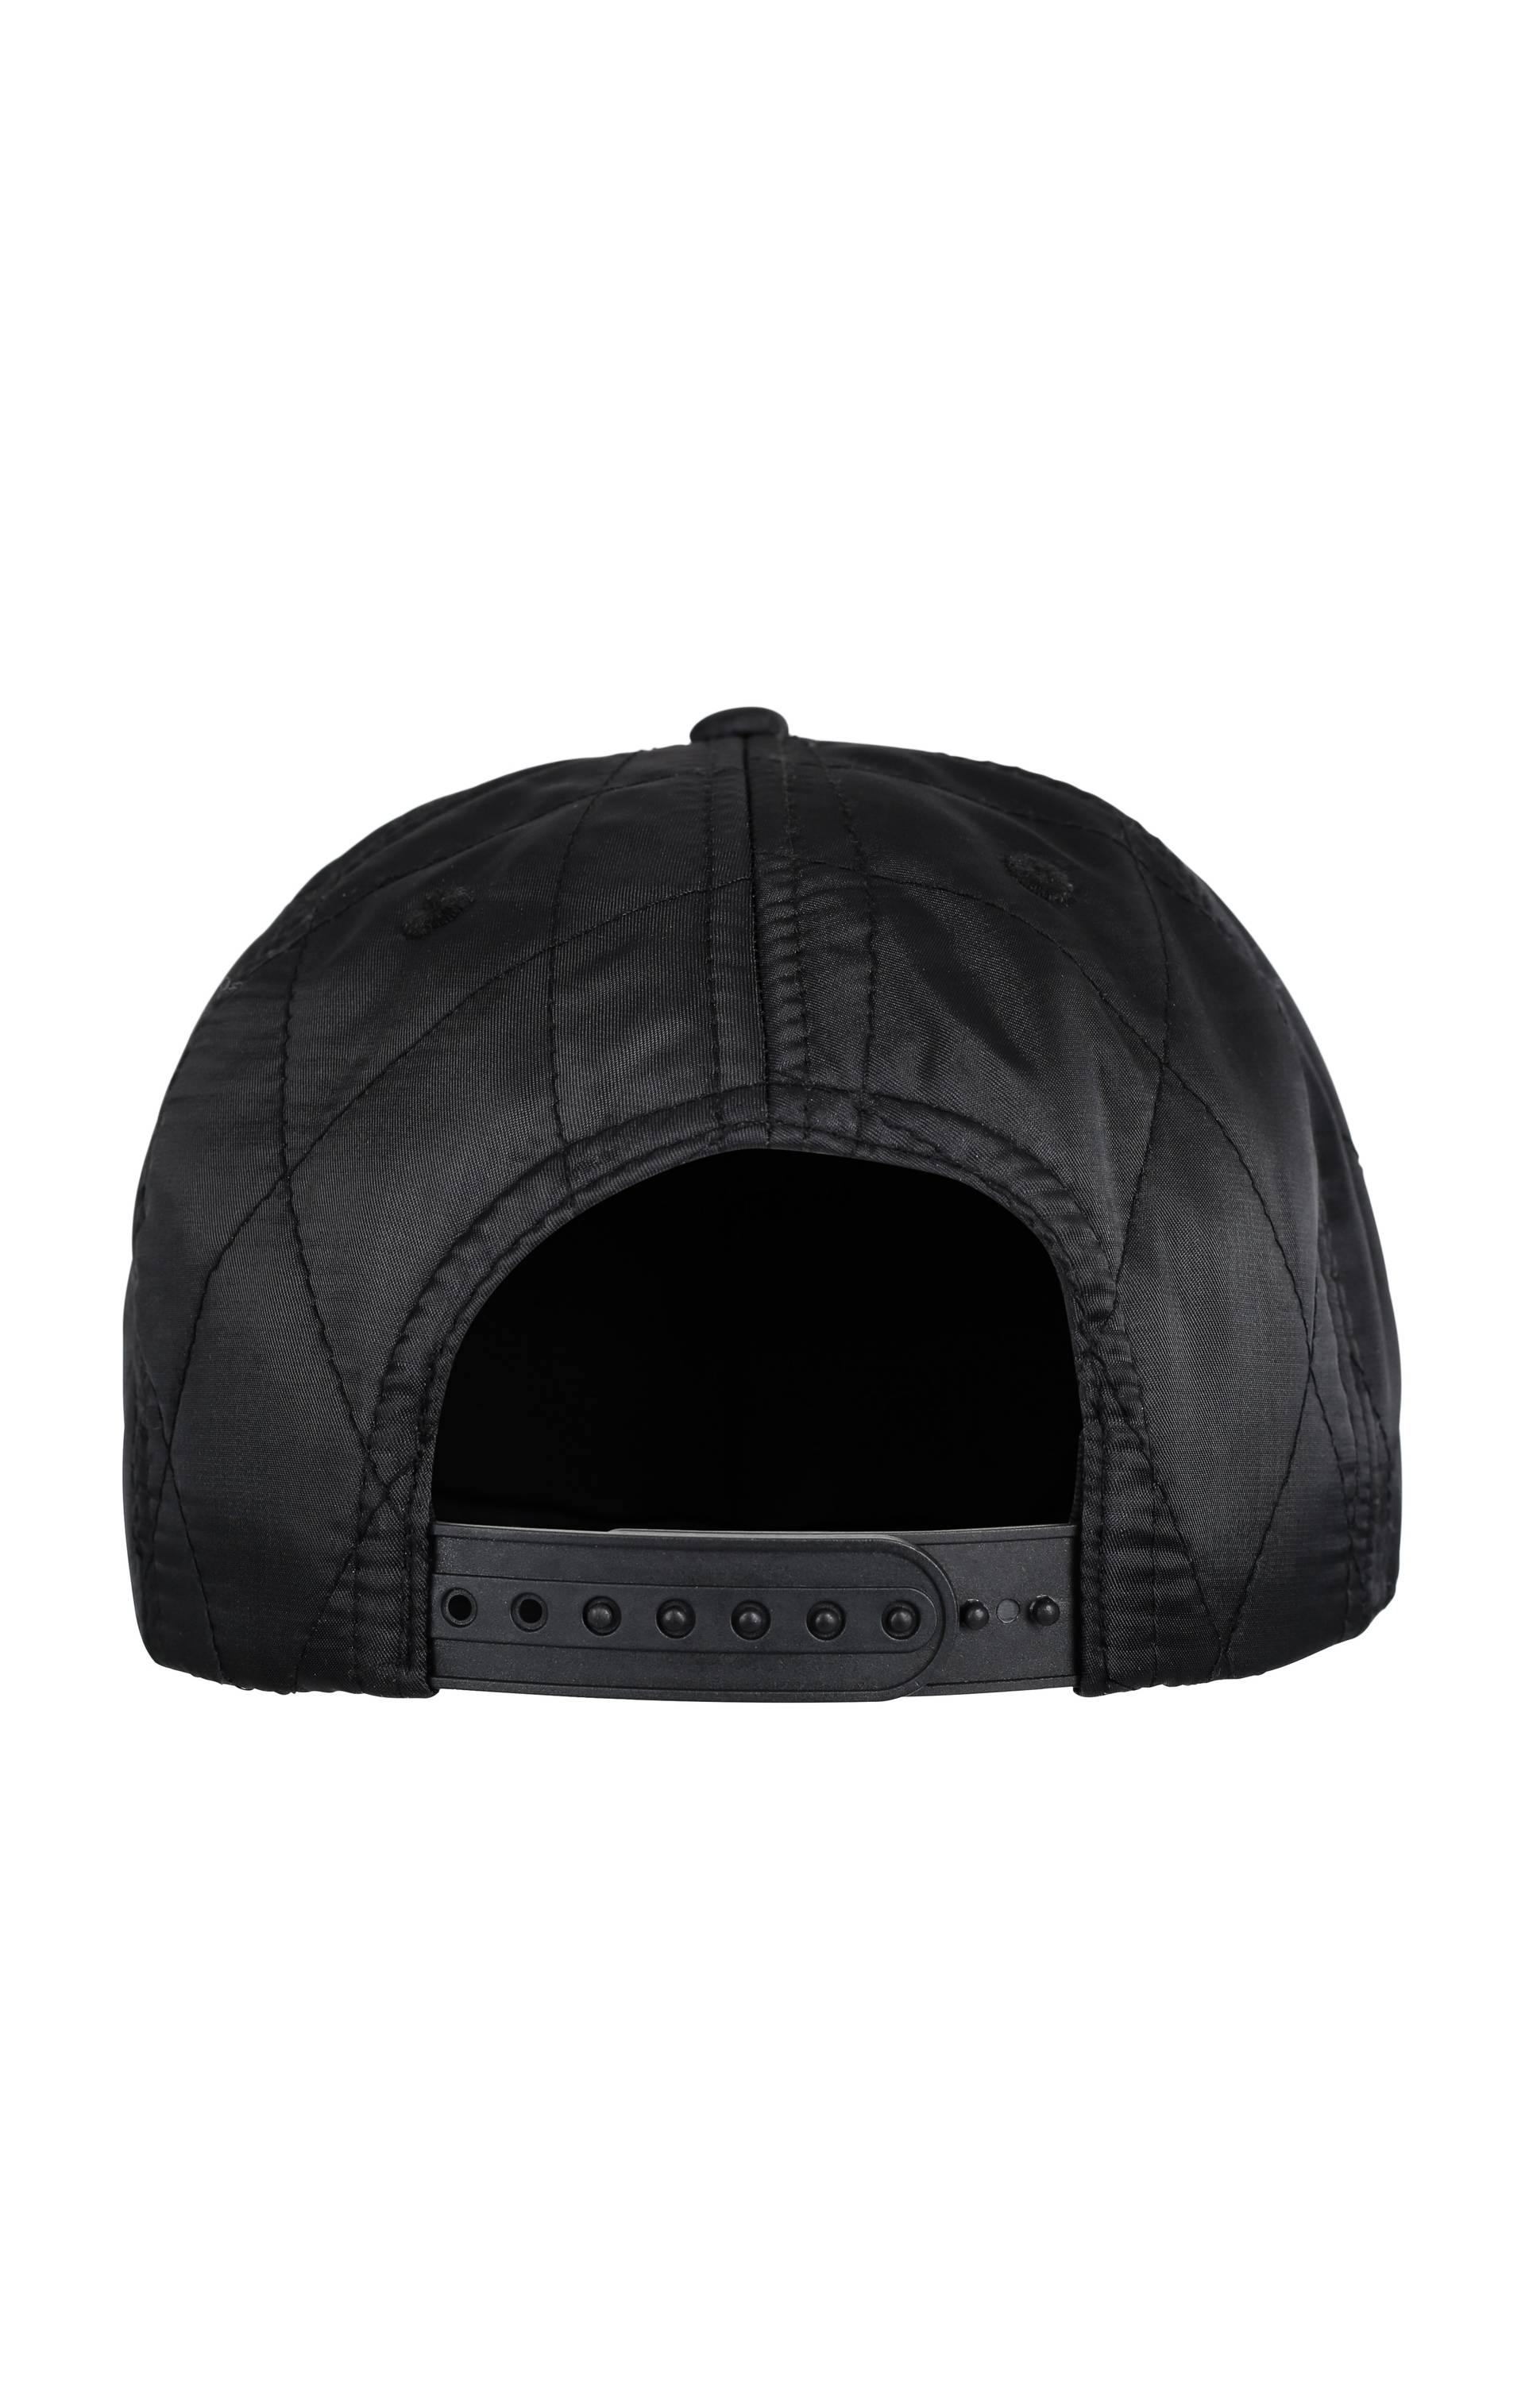 Onepiece Quilted Cap Snapback Black - 3